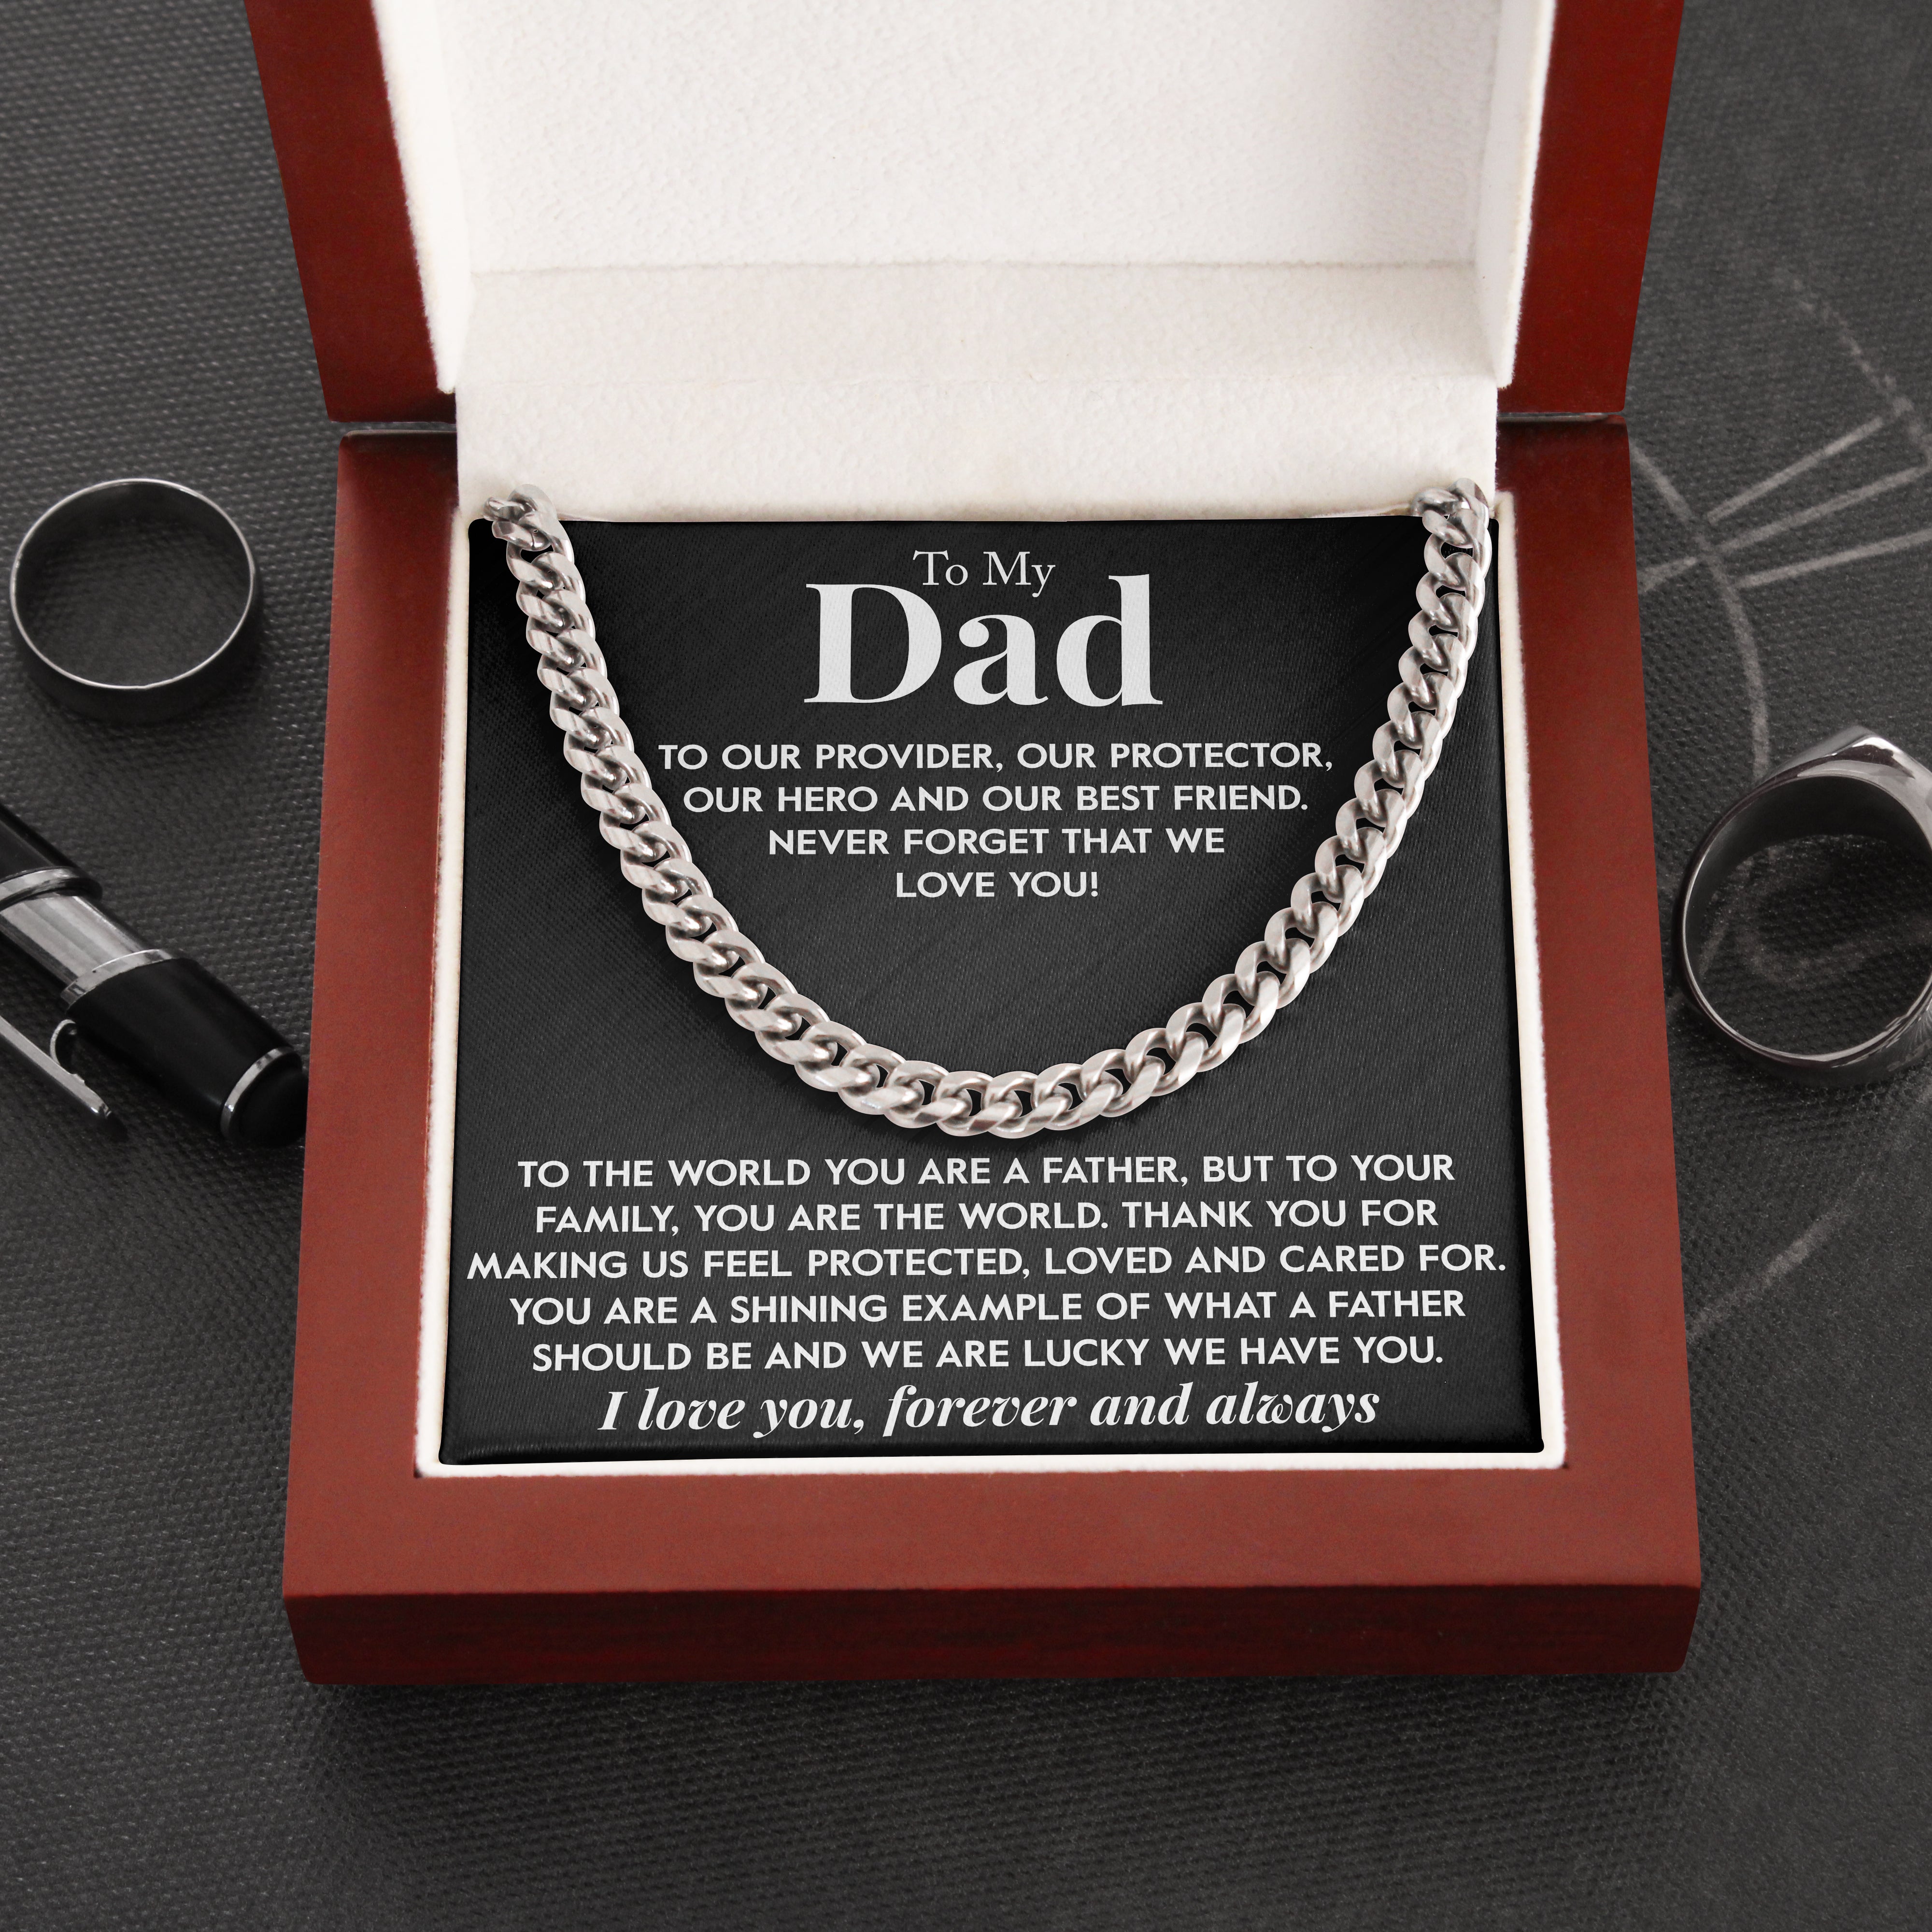 To My Dad | "Lucky to have you" | Cuban Chain Link